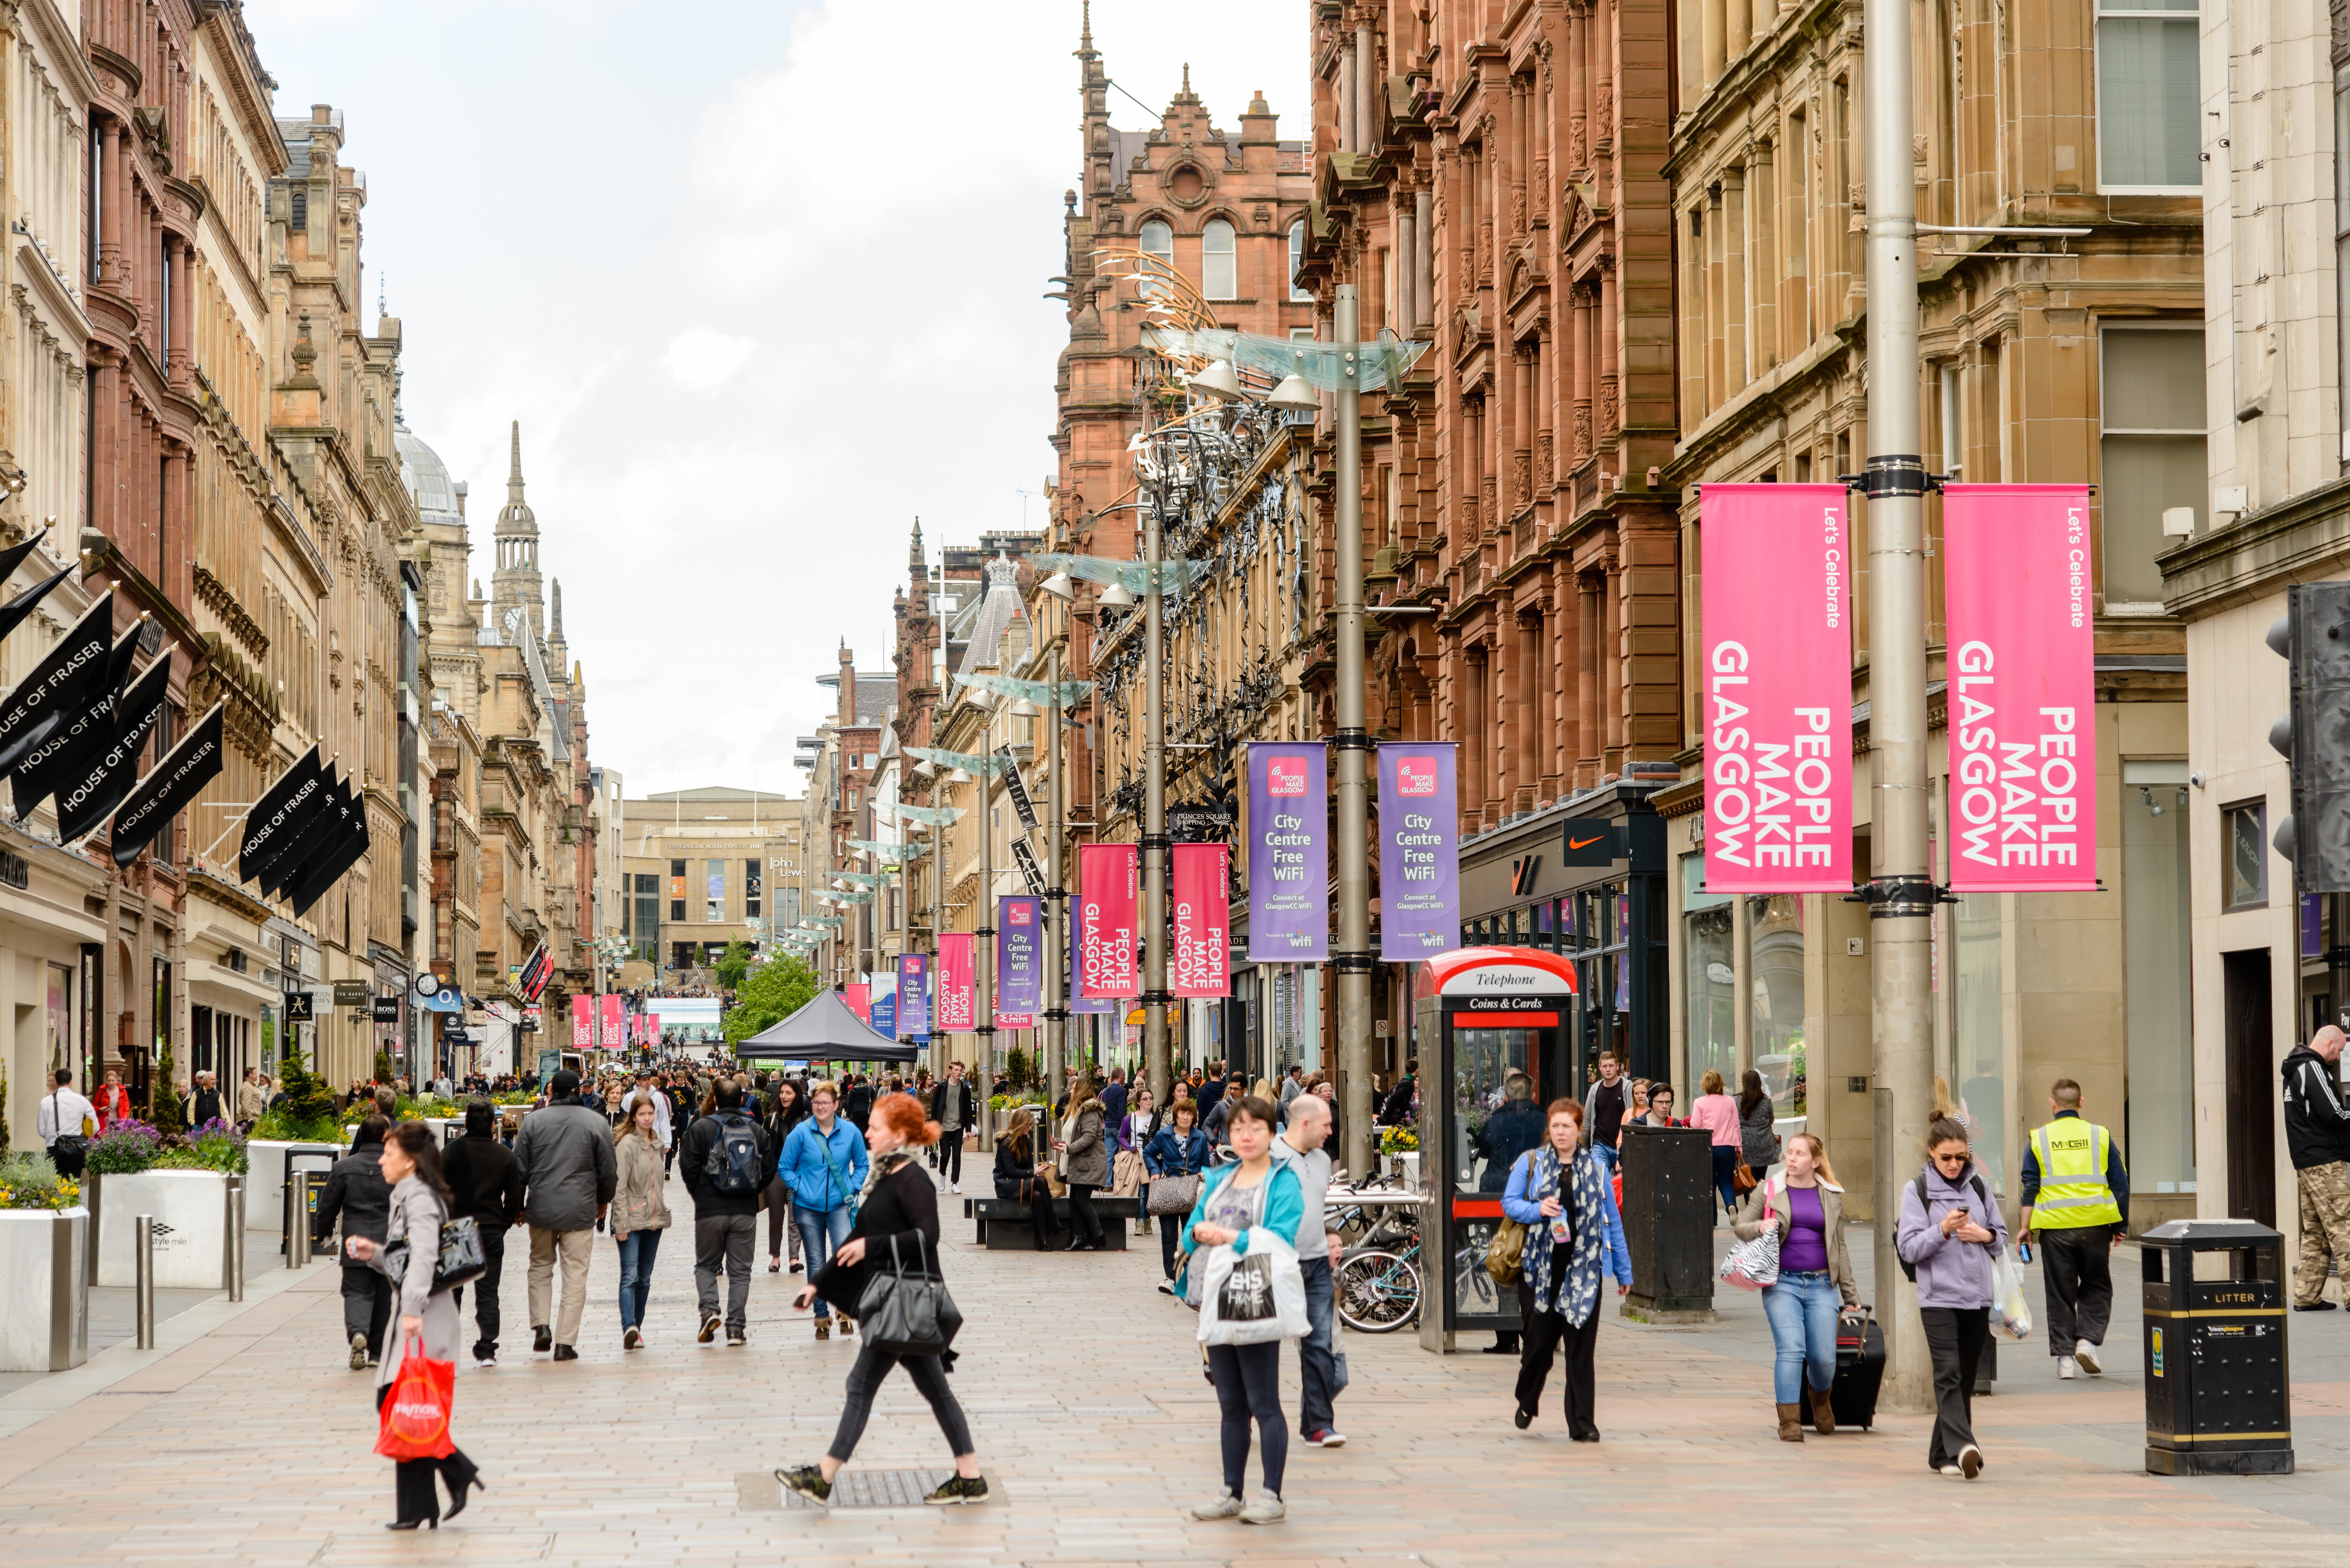 Glasgow City Council unveils plans to revive late-night hospitality